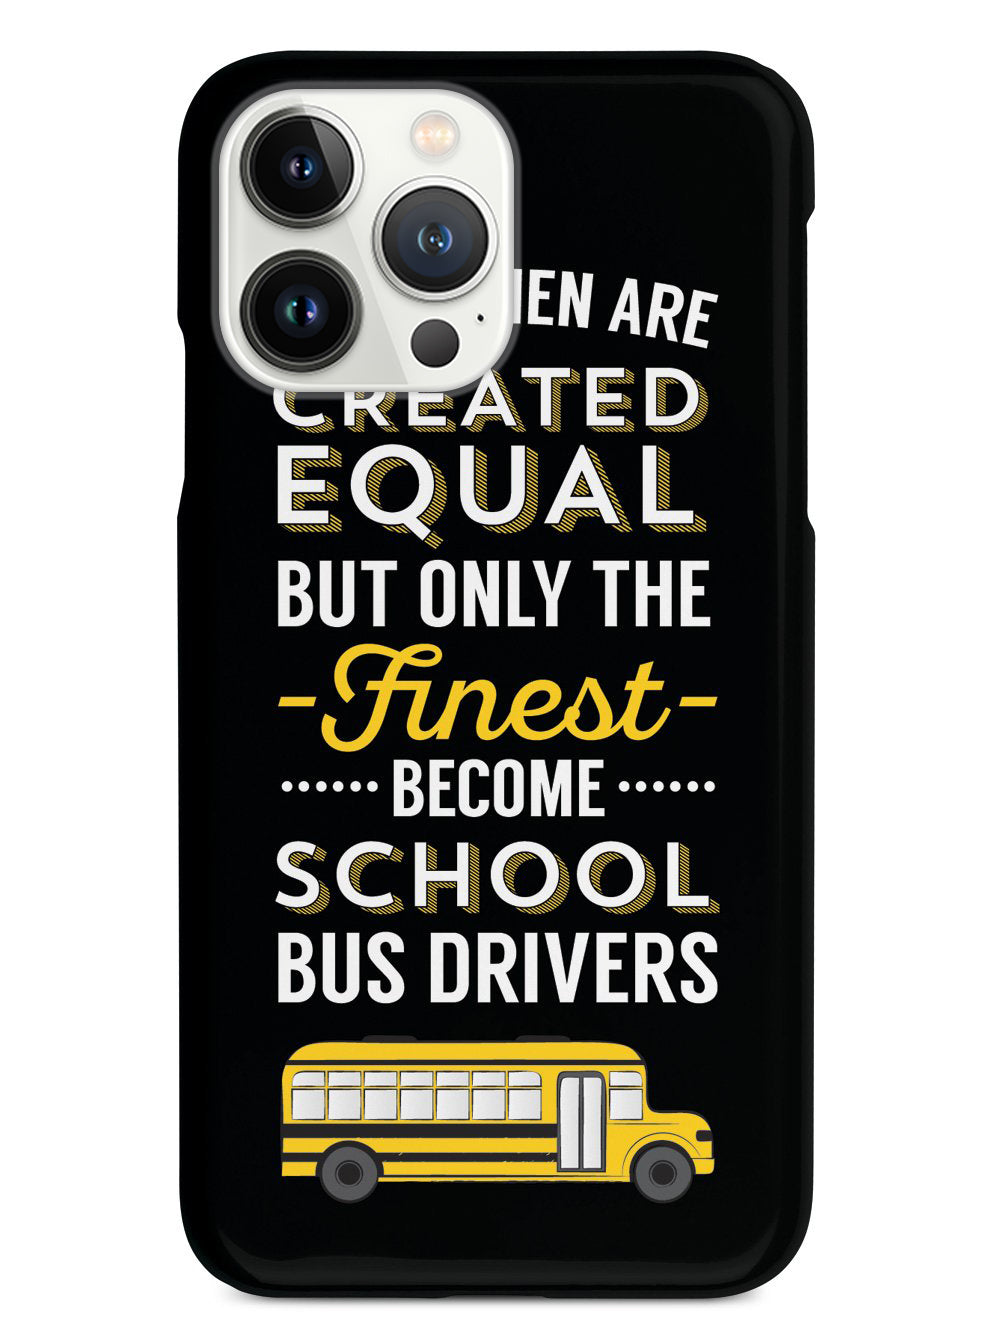 Only The Finest - School Bus Drivers Case